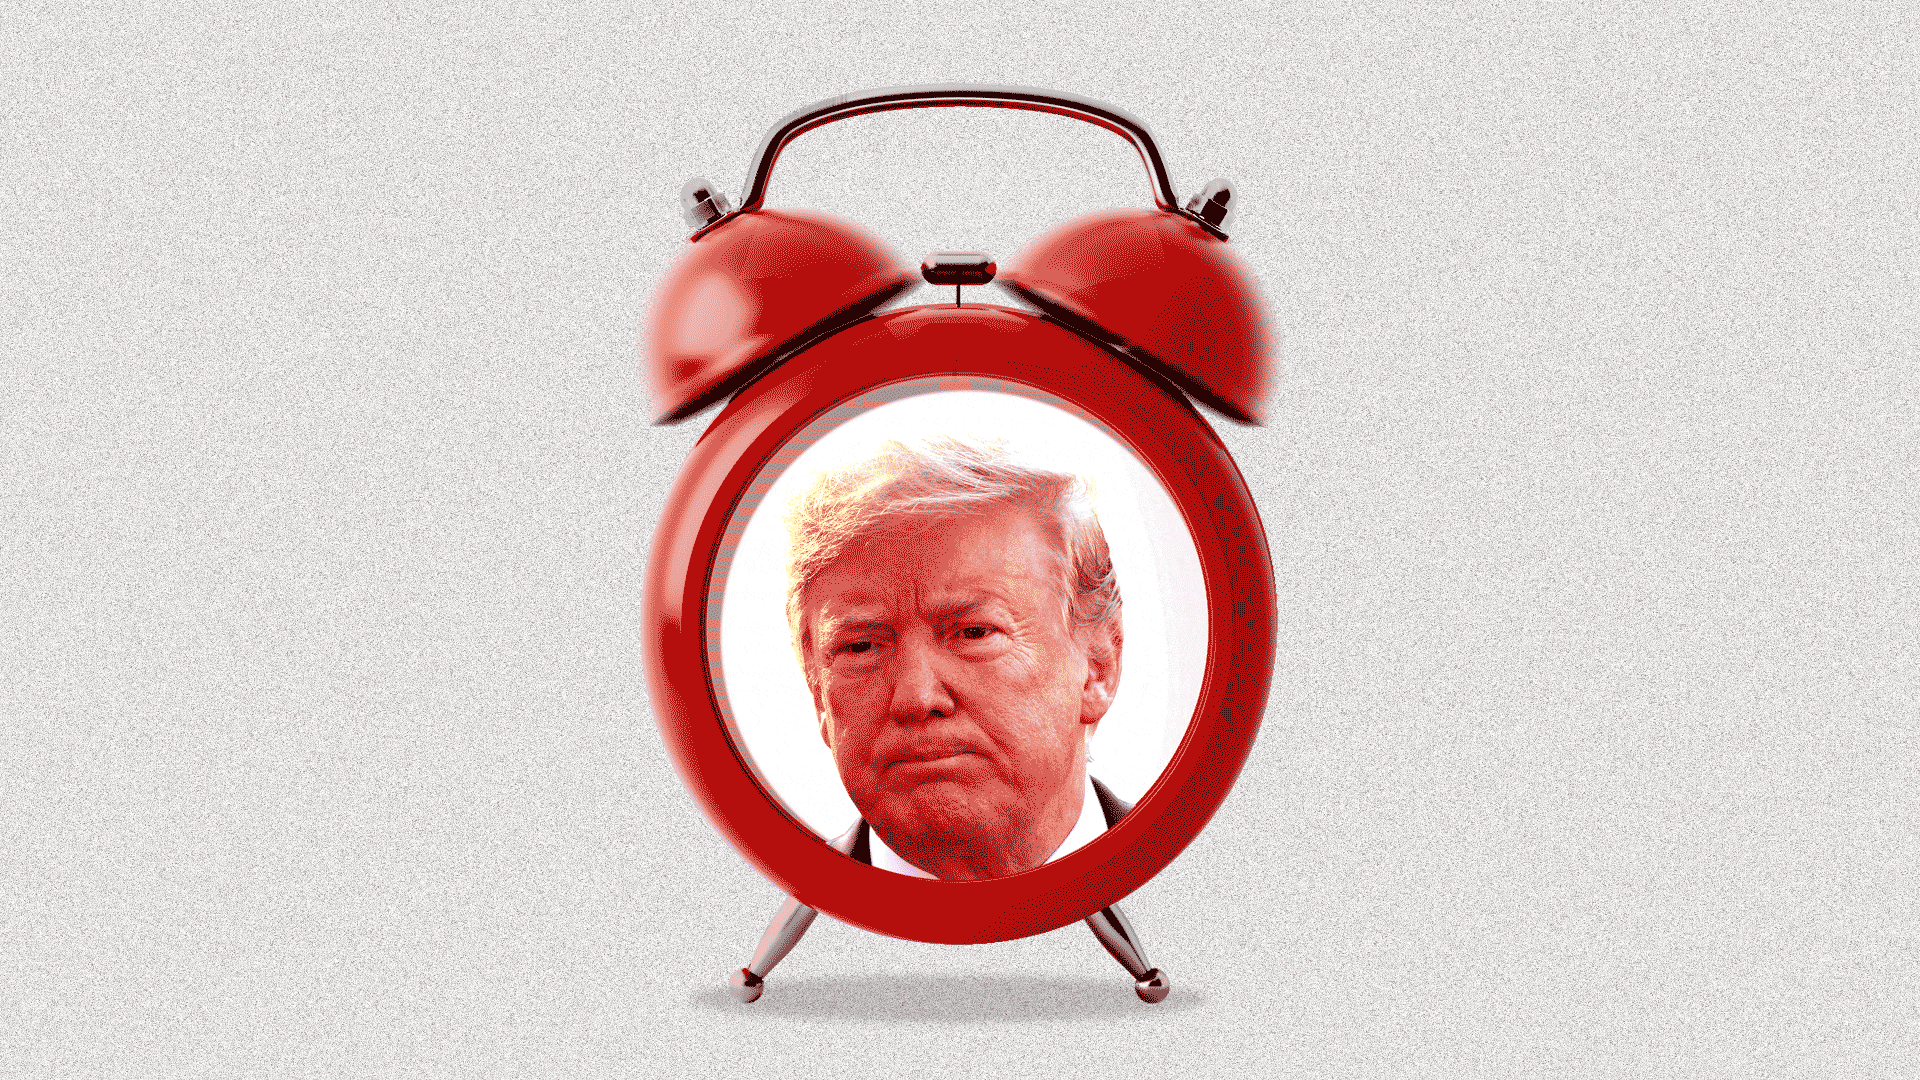 Animated GIF of alarm clock with Trump face